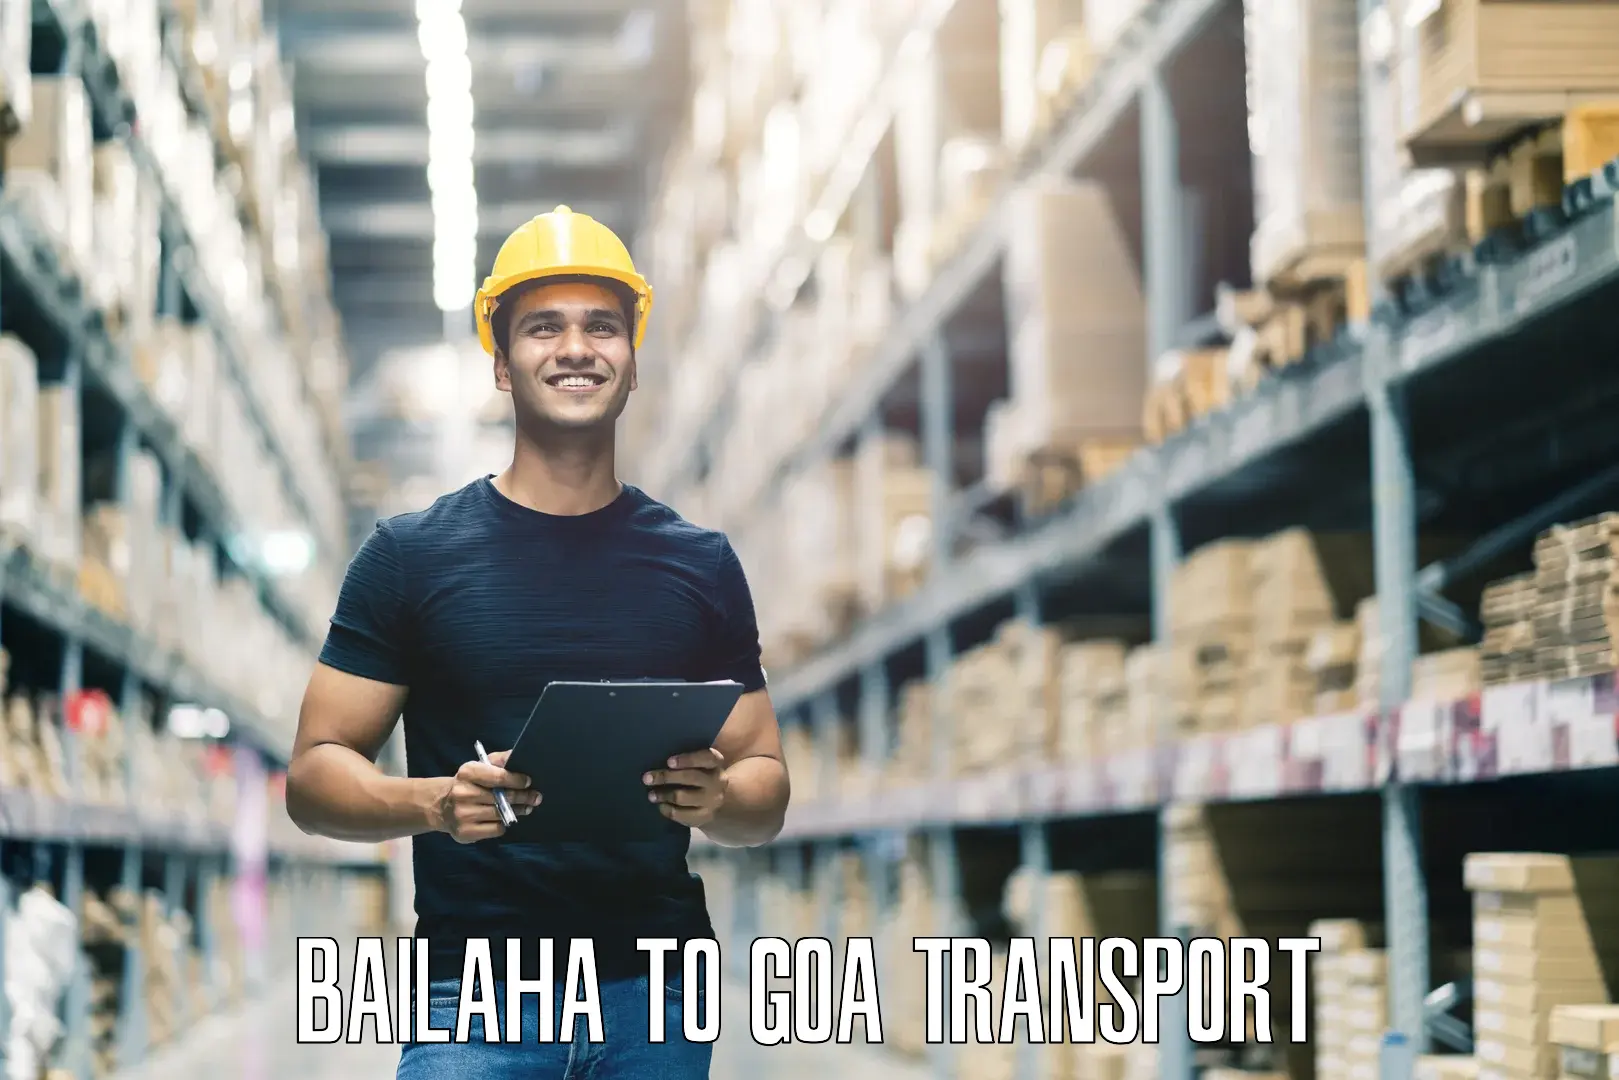 Transport bike from one state to another Bailaha to Goa University